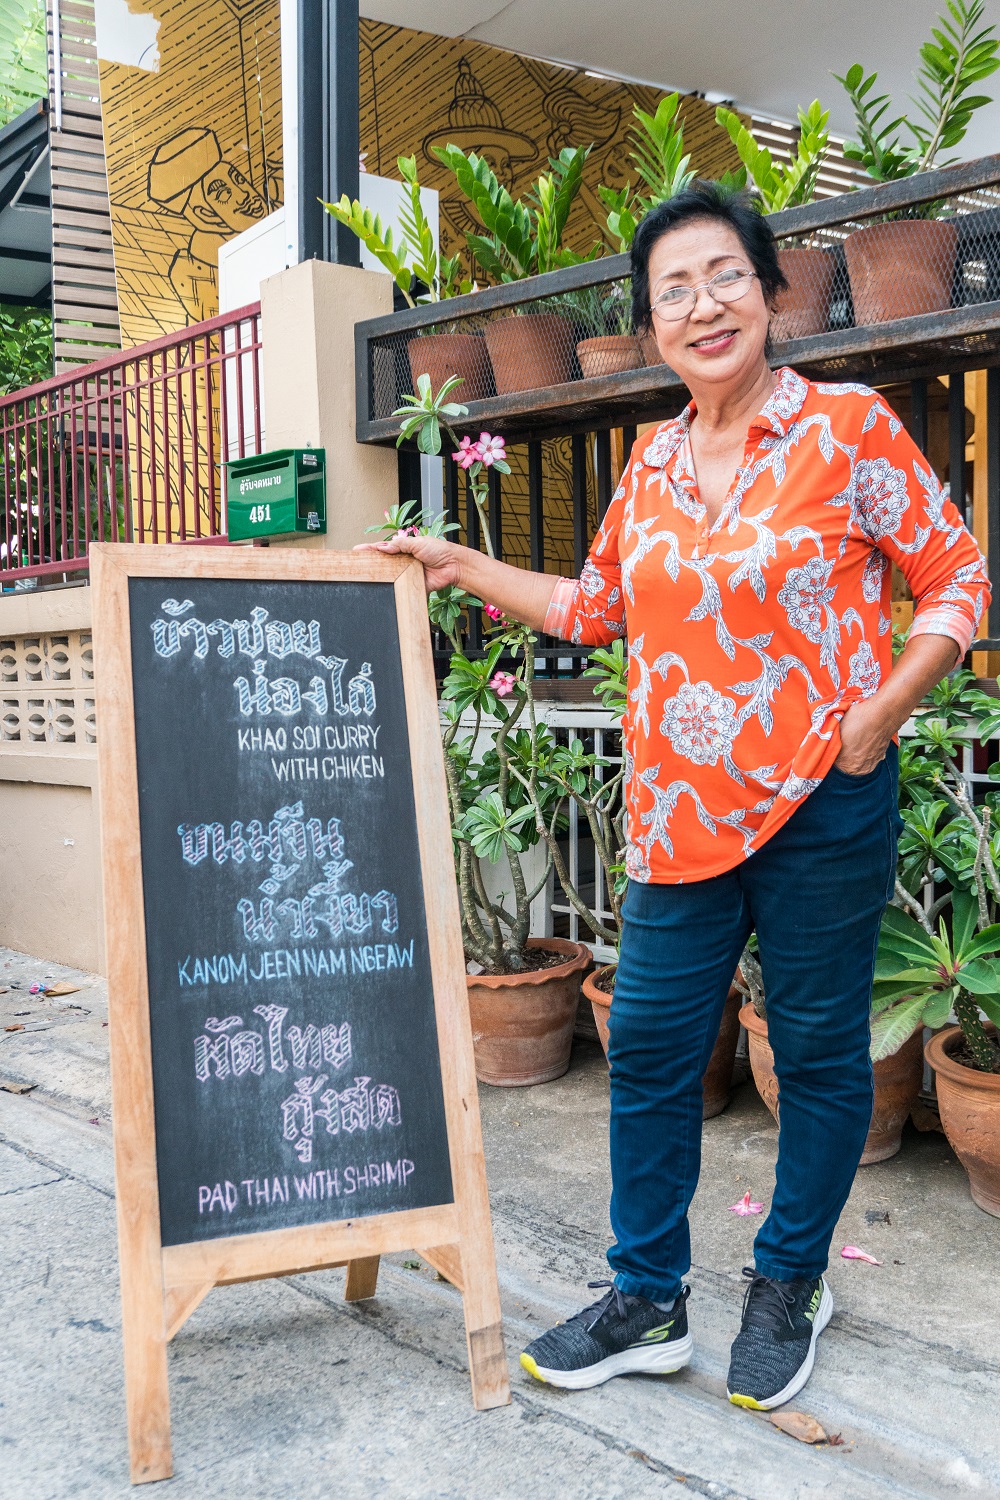 Siripha ‘Lek’ Chariton poses with a sign in front of her restaurant.